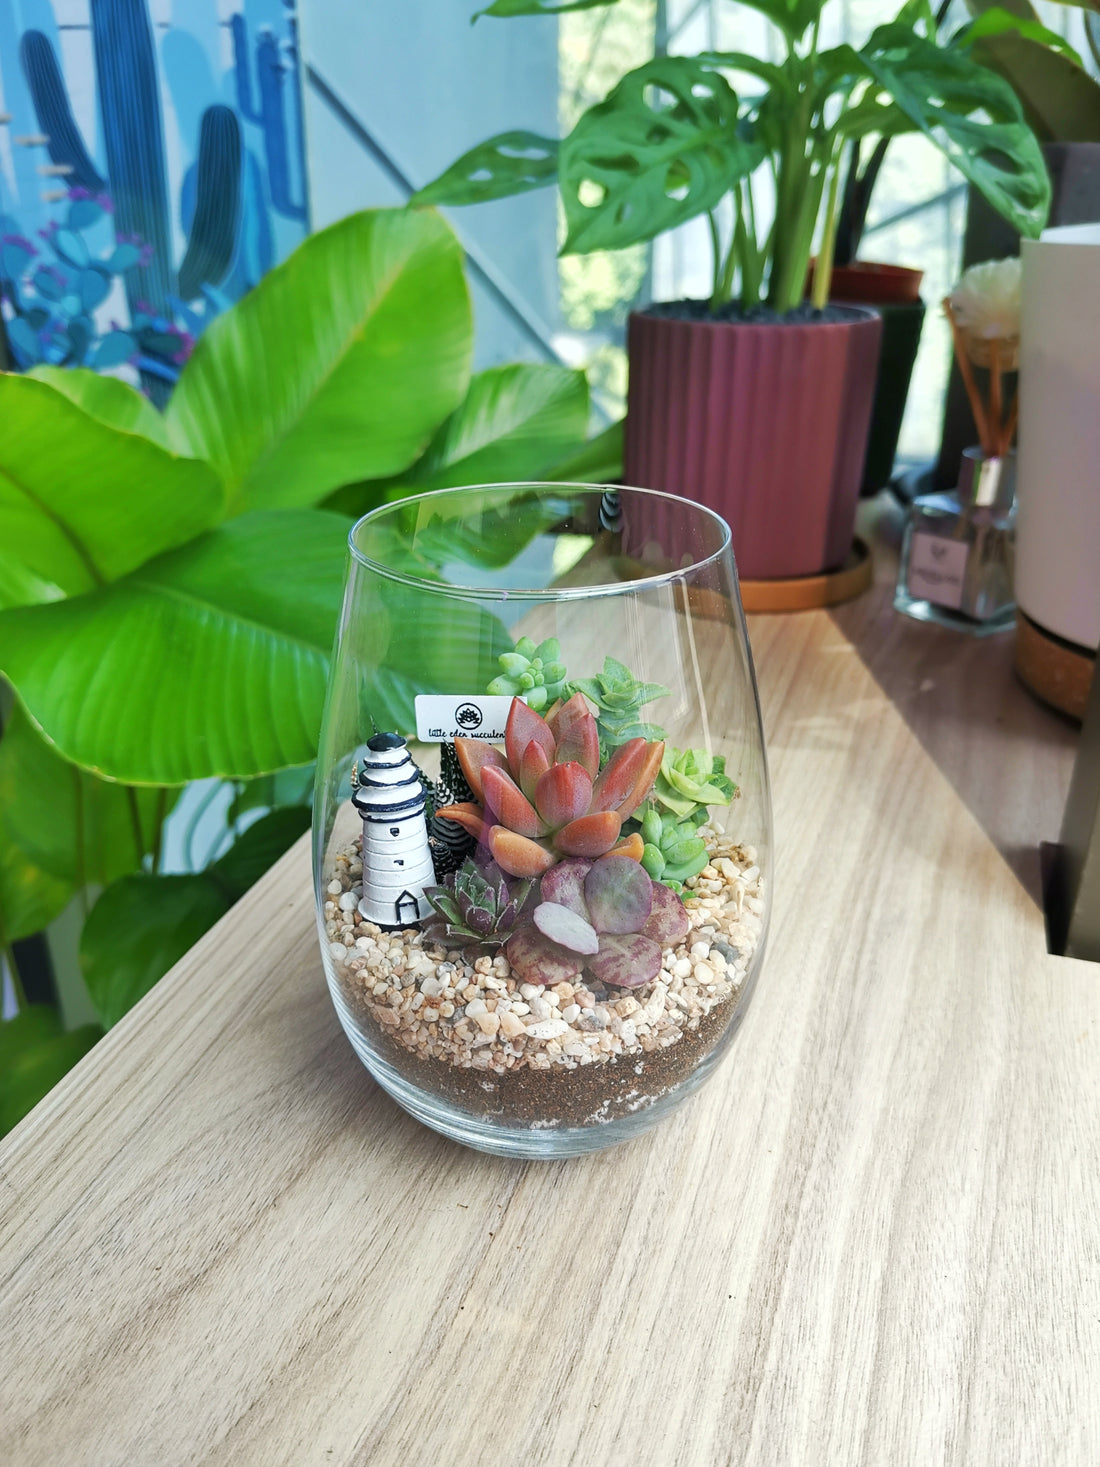 Can we plant moss in a terrarium with succulents?